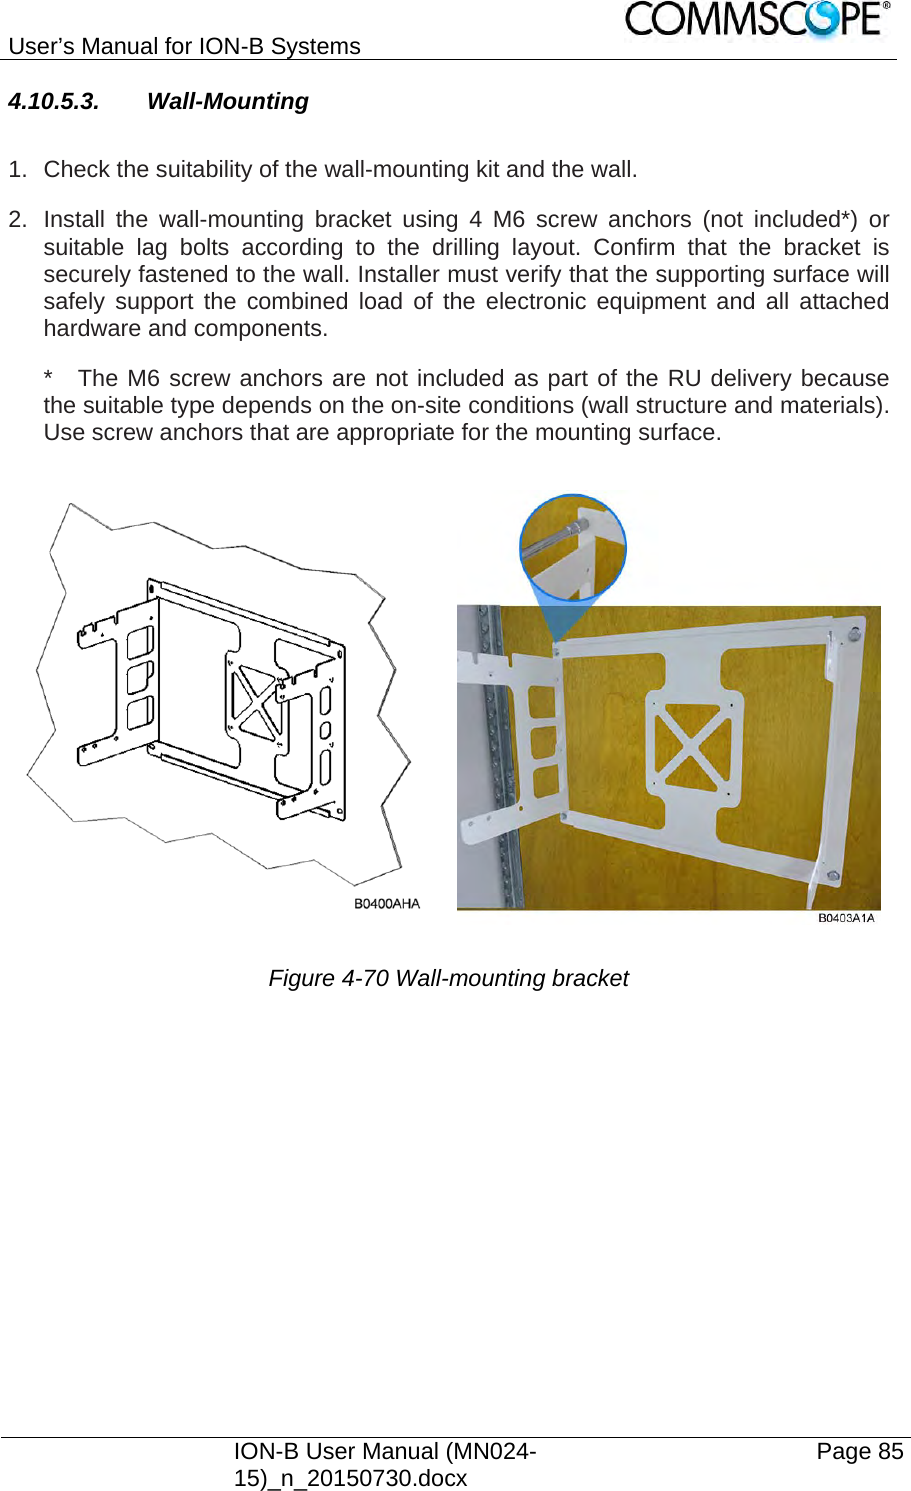 User’s Manual for ION-B Systems    ION-B User Manual (MN024-15)_n_20150730.docx  Page 85 4.10.5.3. Wall-Mounting  1.  Check the suitability of the wall-mounting kit and the wall. 2.  Install the wall-mounting bracket using 4 M6 screw anchors (not included*) or suitable lag bolts according to the drilling layout. Confirm that the bracket is securely fastened to the wall. Installer must verify that the supporting surface will safely support the combined load of the electronic equipment and all attached hardware and components. *  The M6 screw anchors are not included as part of the RU delivery because the suitable type depends on the on-site conditions (wall structure and materials). Use screw anchors that are appropriate for the mounting surface.  Figure 4-70 Wall-mounting bracket   